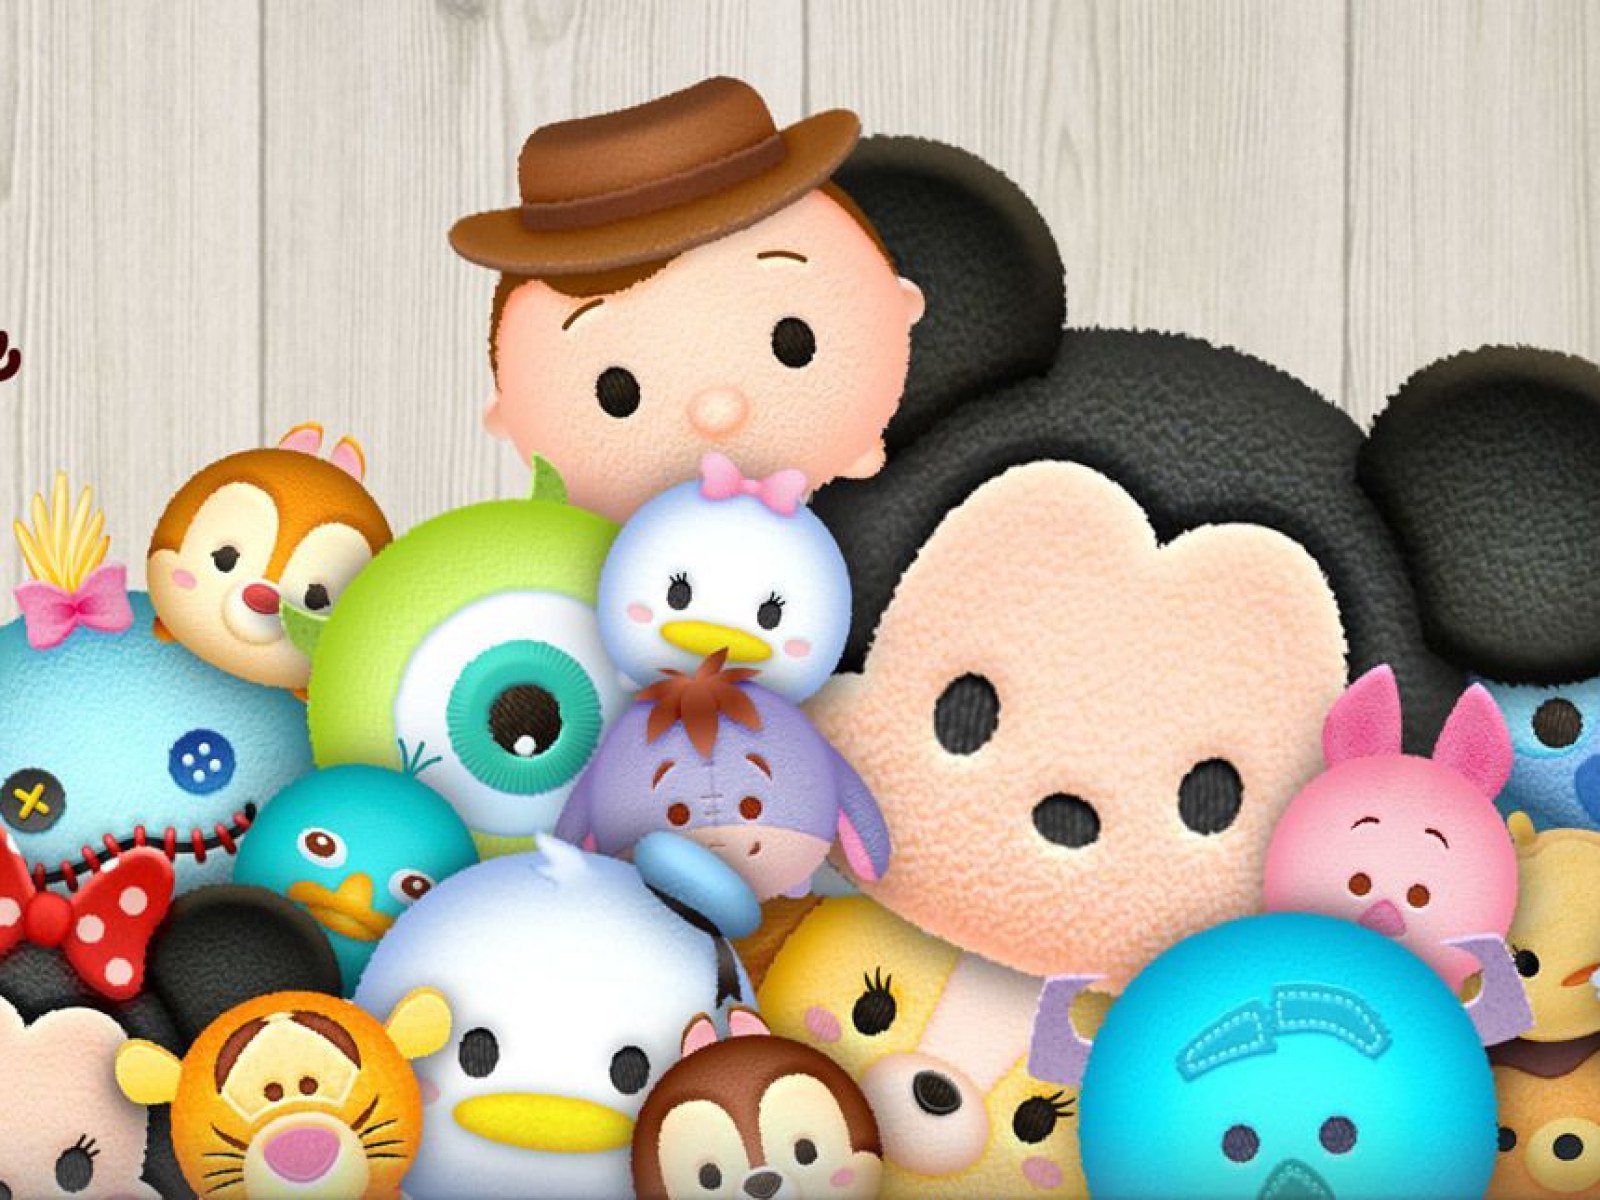 Tsum Tsum January 19 Event Help Makes Hearts White Handed Initial P Score Bubbles And Other Best Tsum Tips